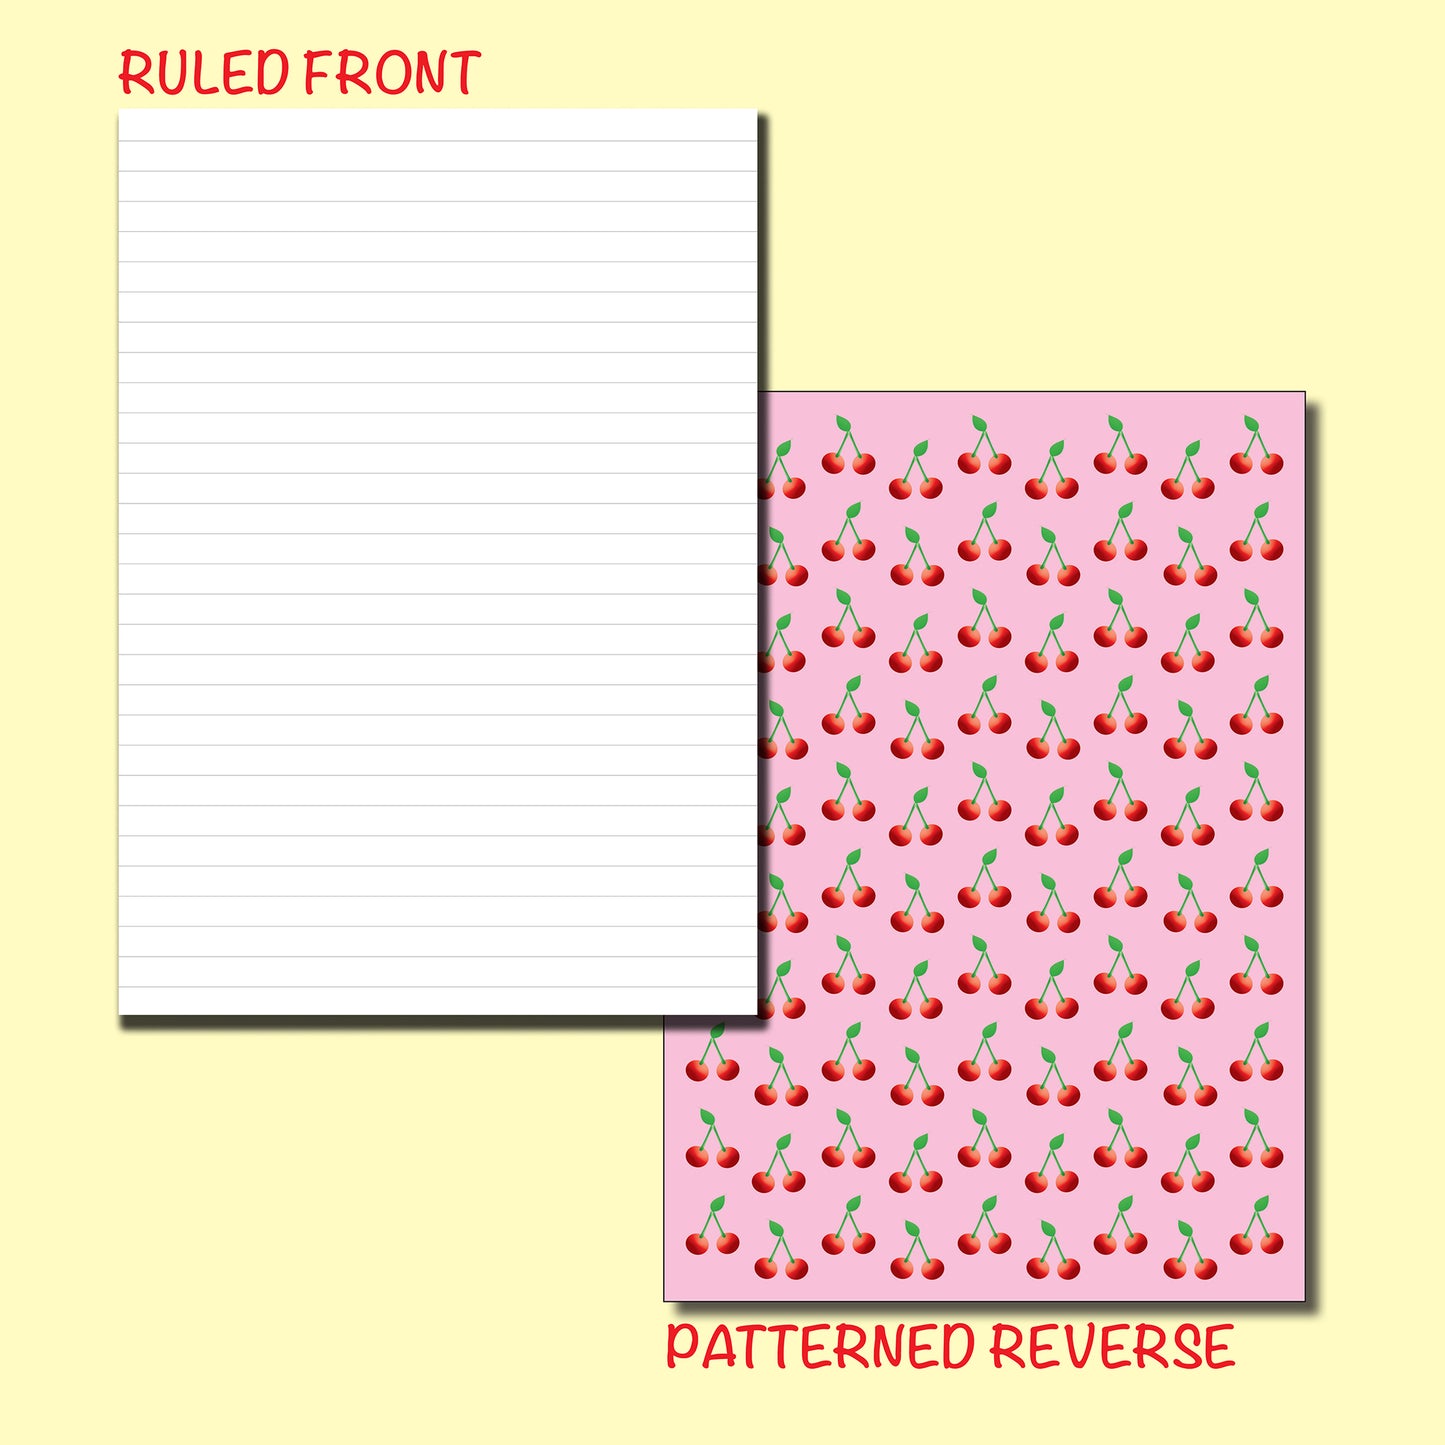 Luxury Ruled Writing Pad A5 120gsm 50 pages Printed reverse